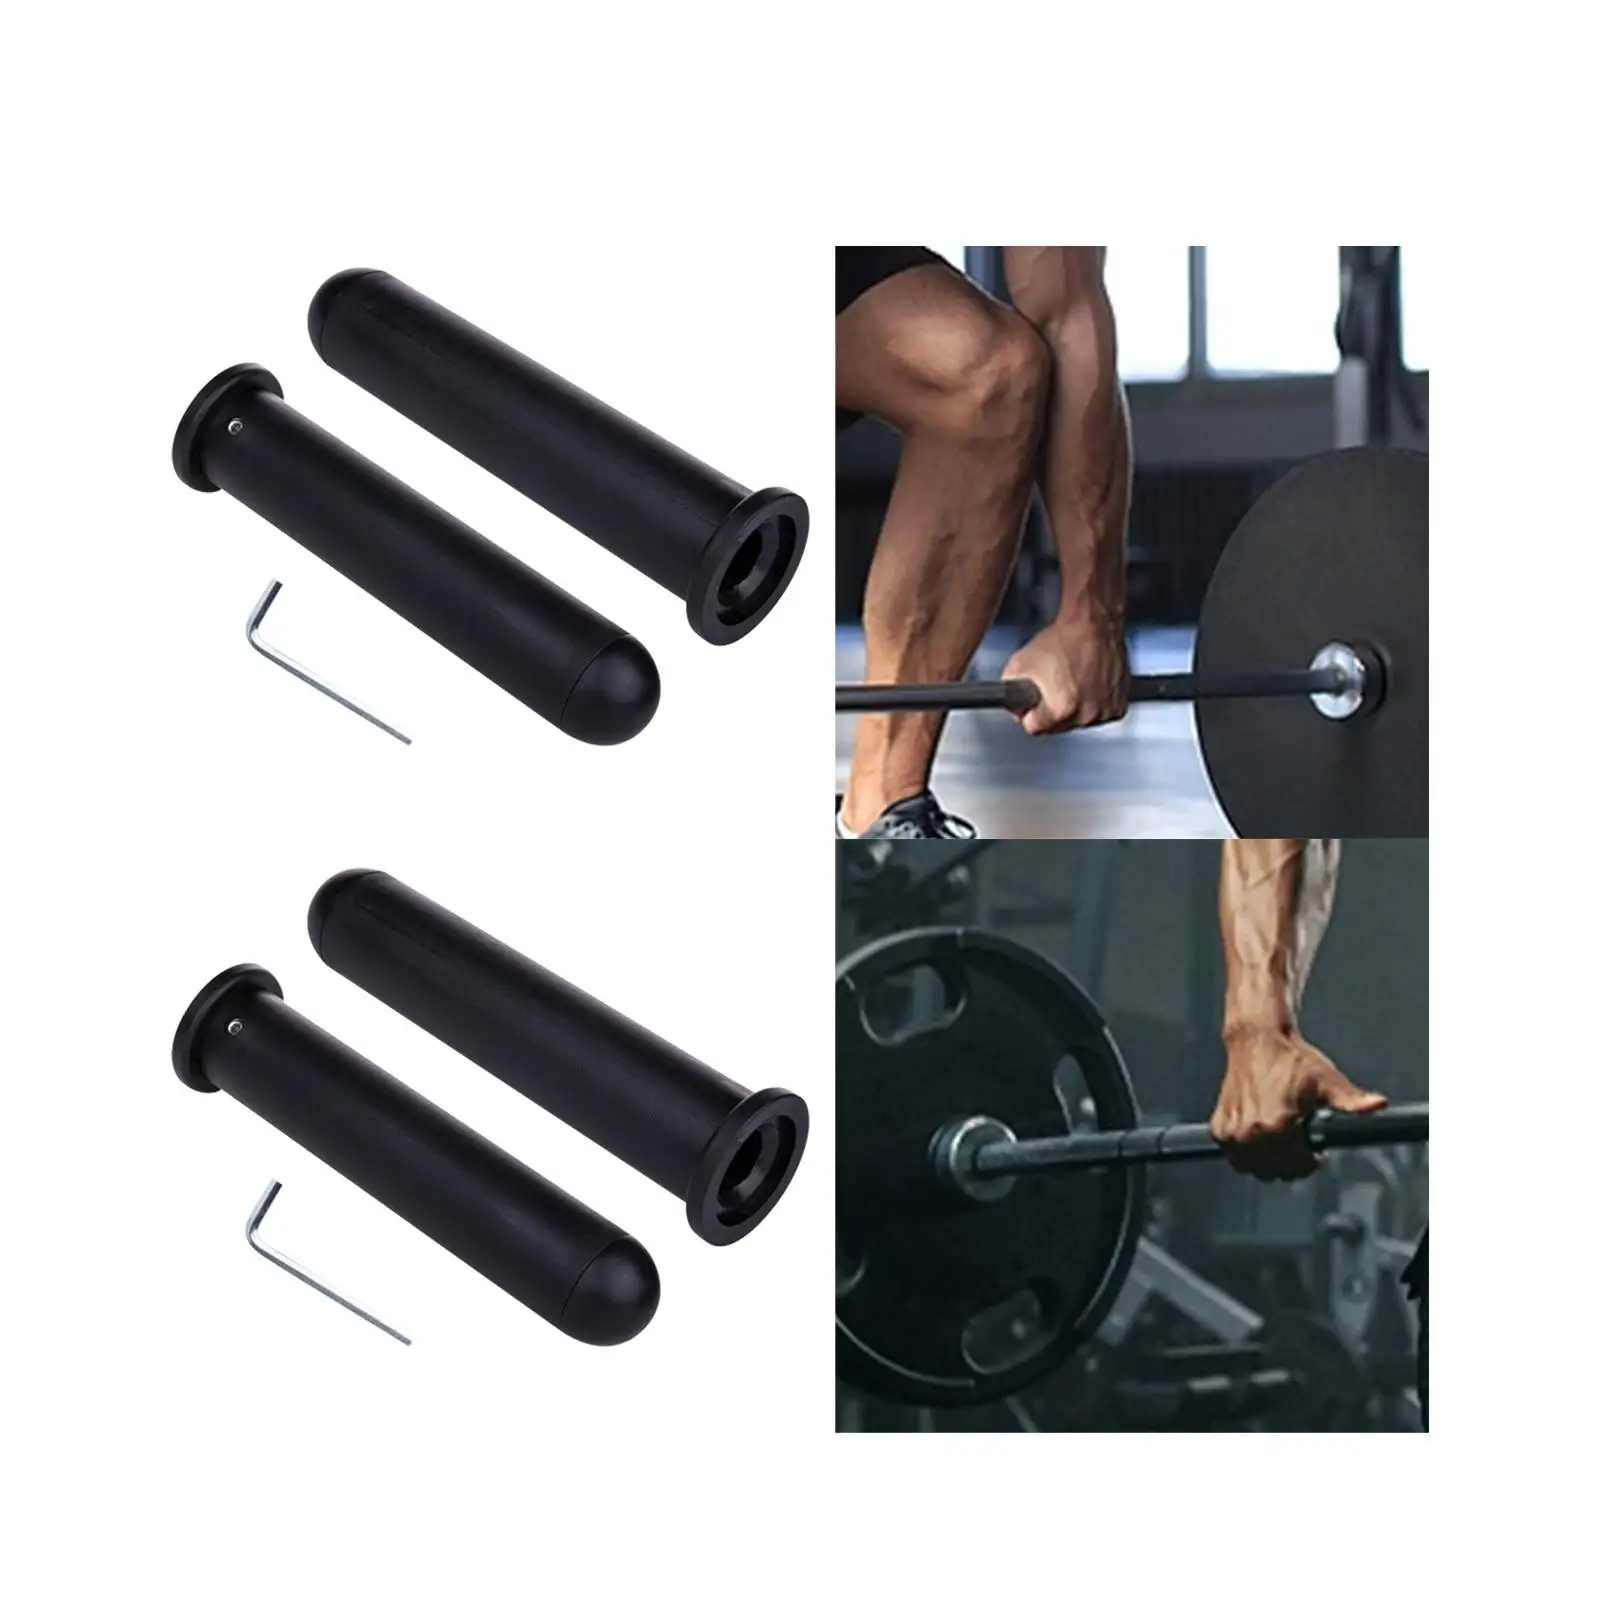 Barbell Adapter Sleeves Strength Training Barbell Attachment Converts Bars to Weight for Women Men Dumbbells Weight Plate Posts